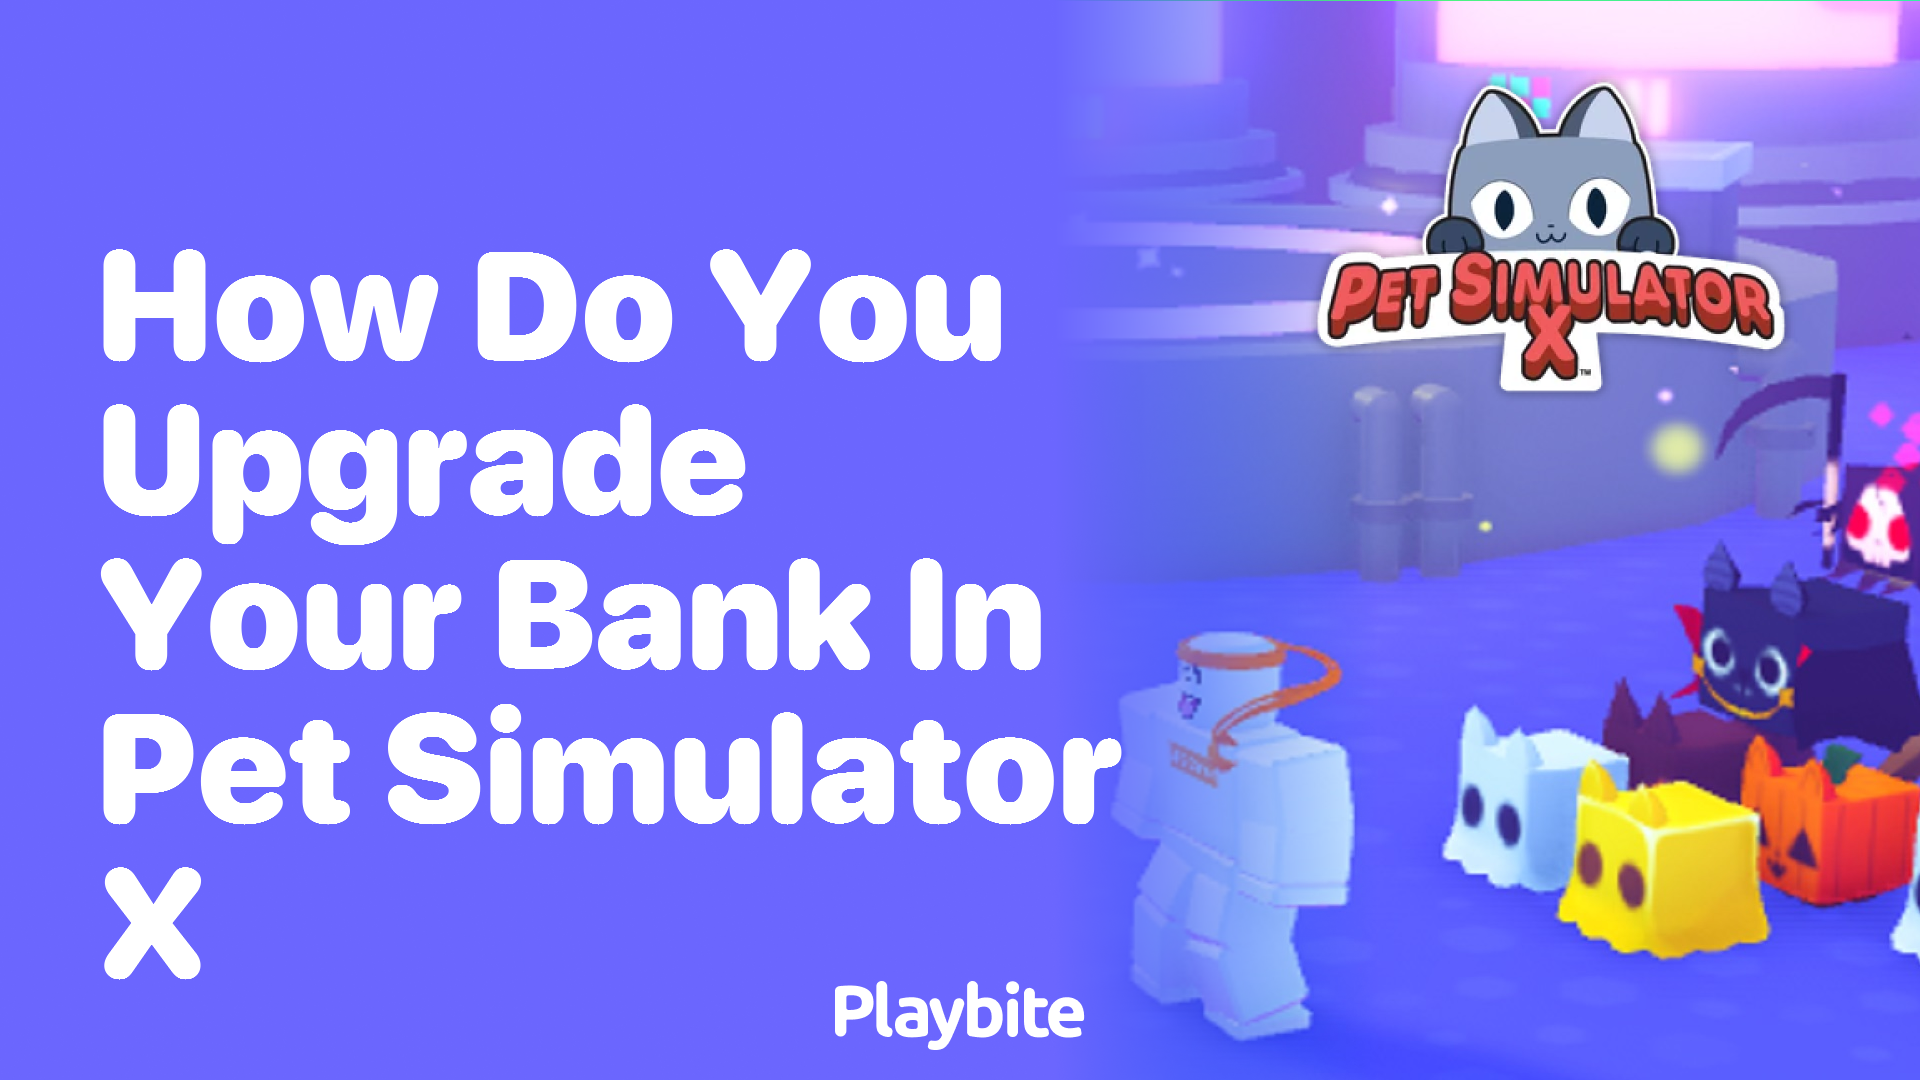 How Do You Upgrade Your Bank in Pet Simulator X?